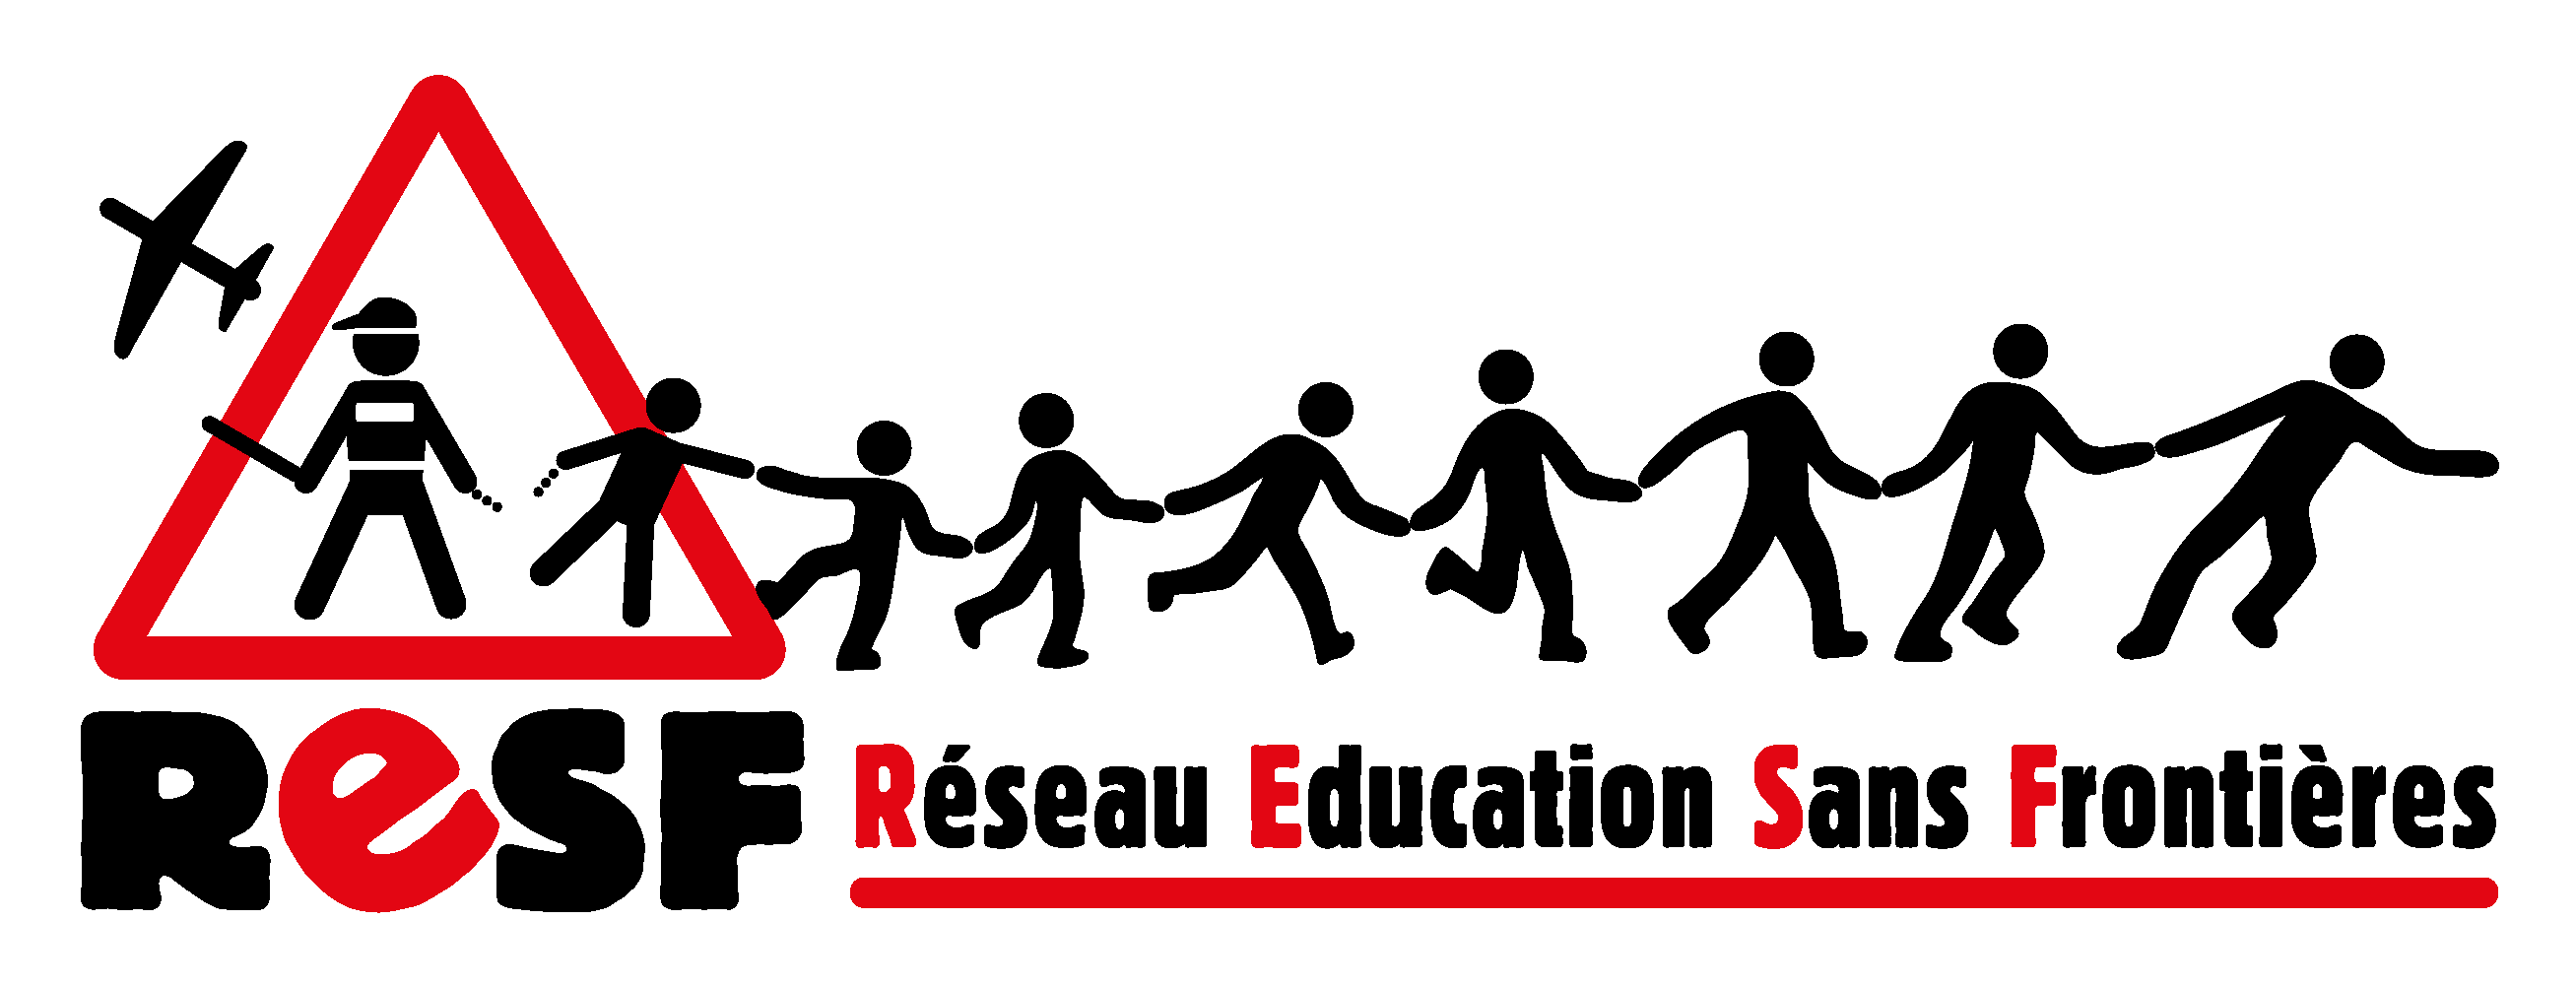 logo_resf_chaine2-2020.png?1618147926